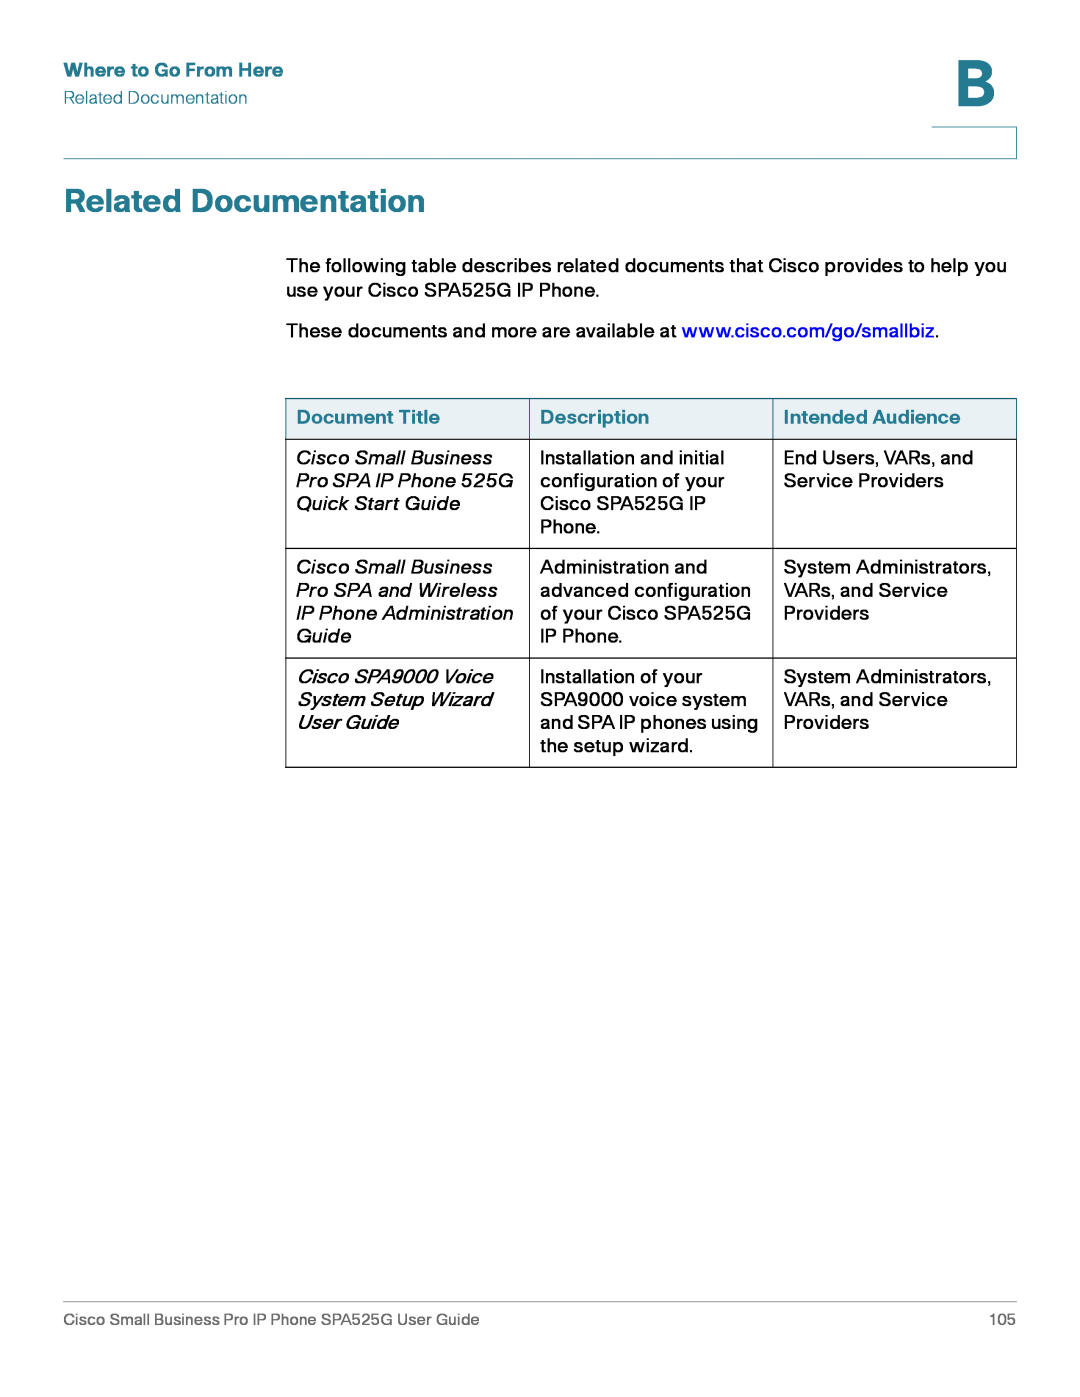 Cisco Systems SPA525G manual Related Documentation, Where to Go From Here, Document Title, Description, Intended Audience 